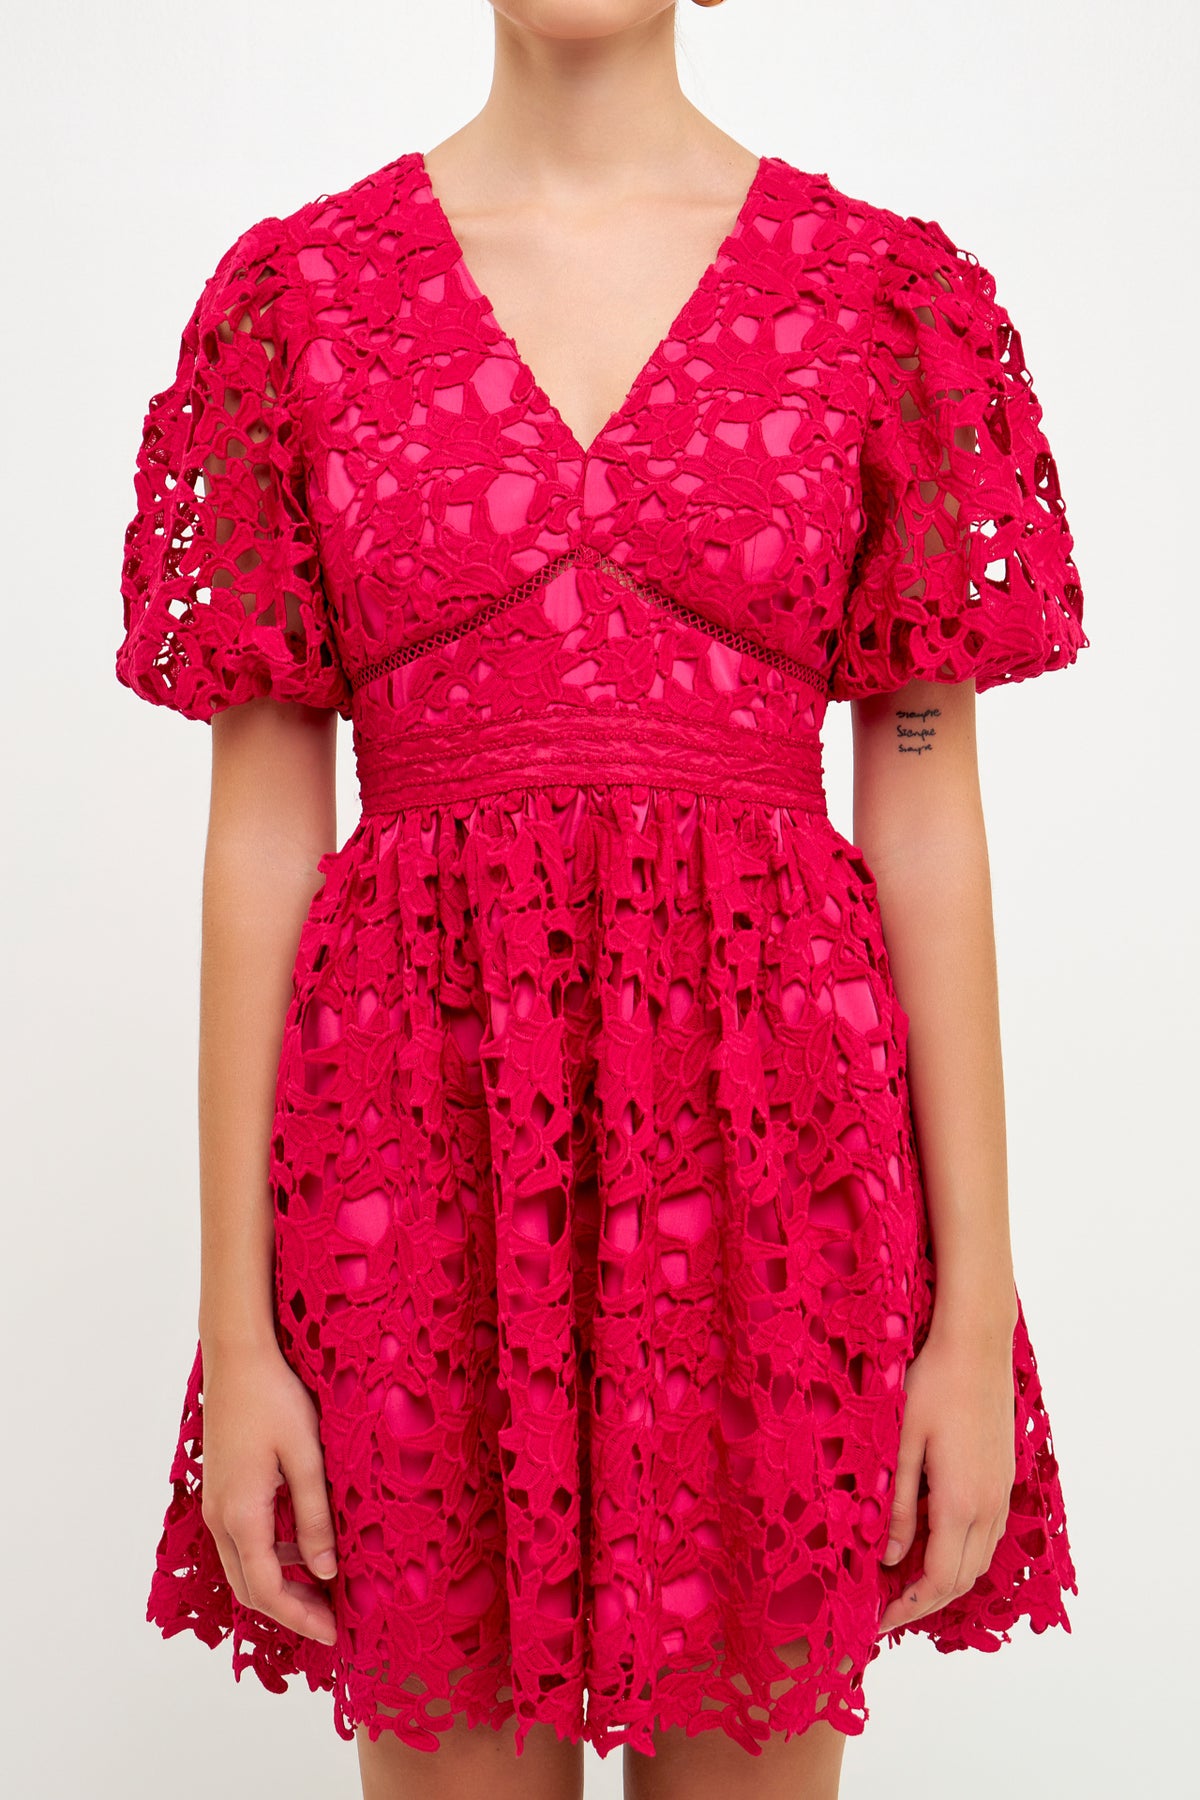 ENDLESS ROSE - Crochet Lace Puff Sleeve Mini Dress - DRESSES available at Objectrare